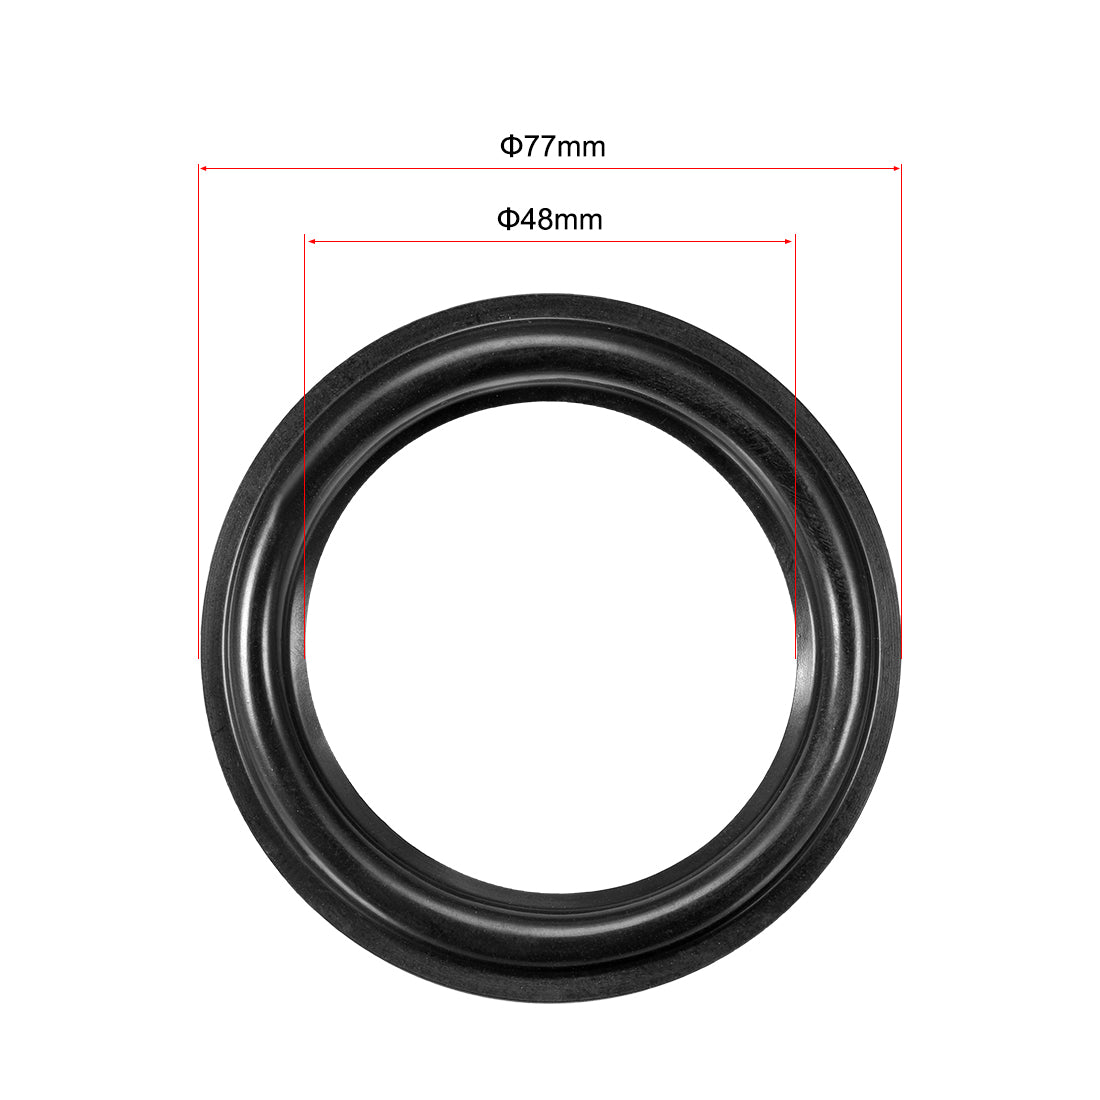 uxcell Uxcell 75mm Speaker Rubber Edge Surround Rings Replacement Parts for Speaker Repair or DIY